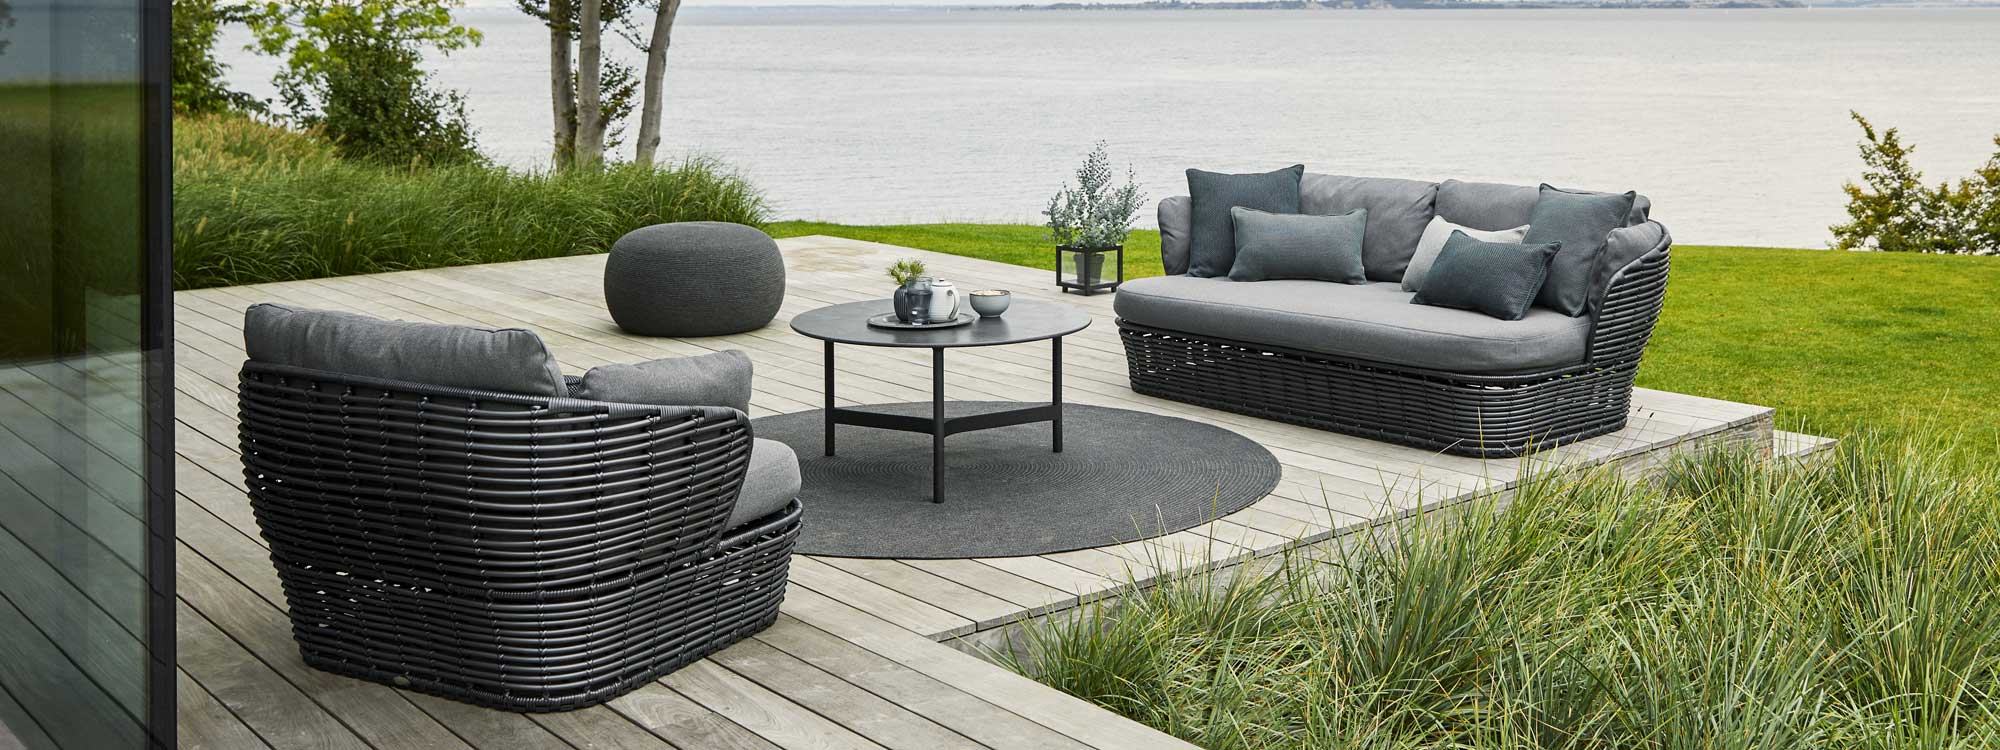 Image of Cane-line Basket furniture in graphite colour with grey cushions